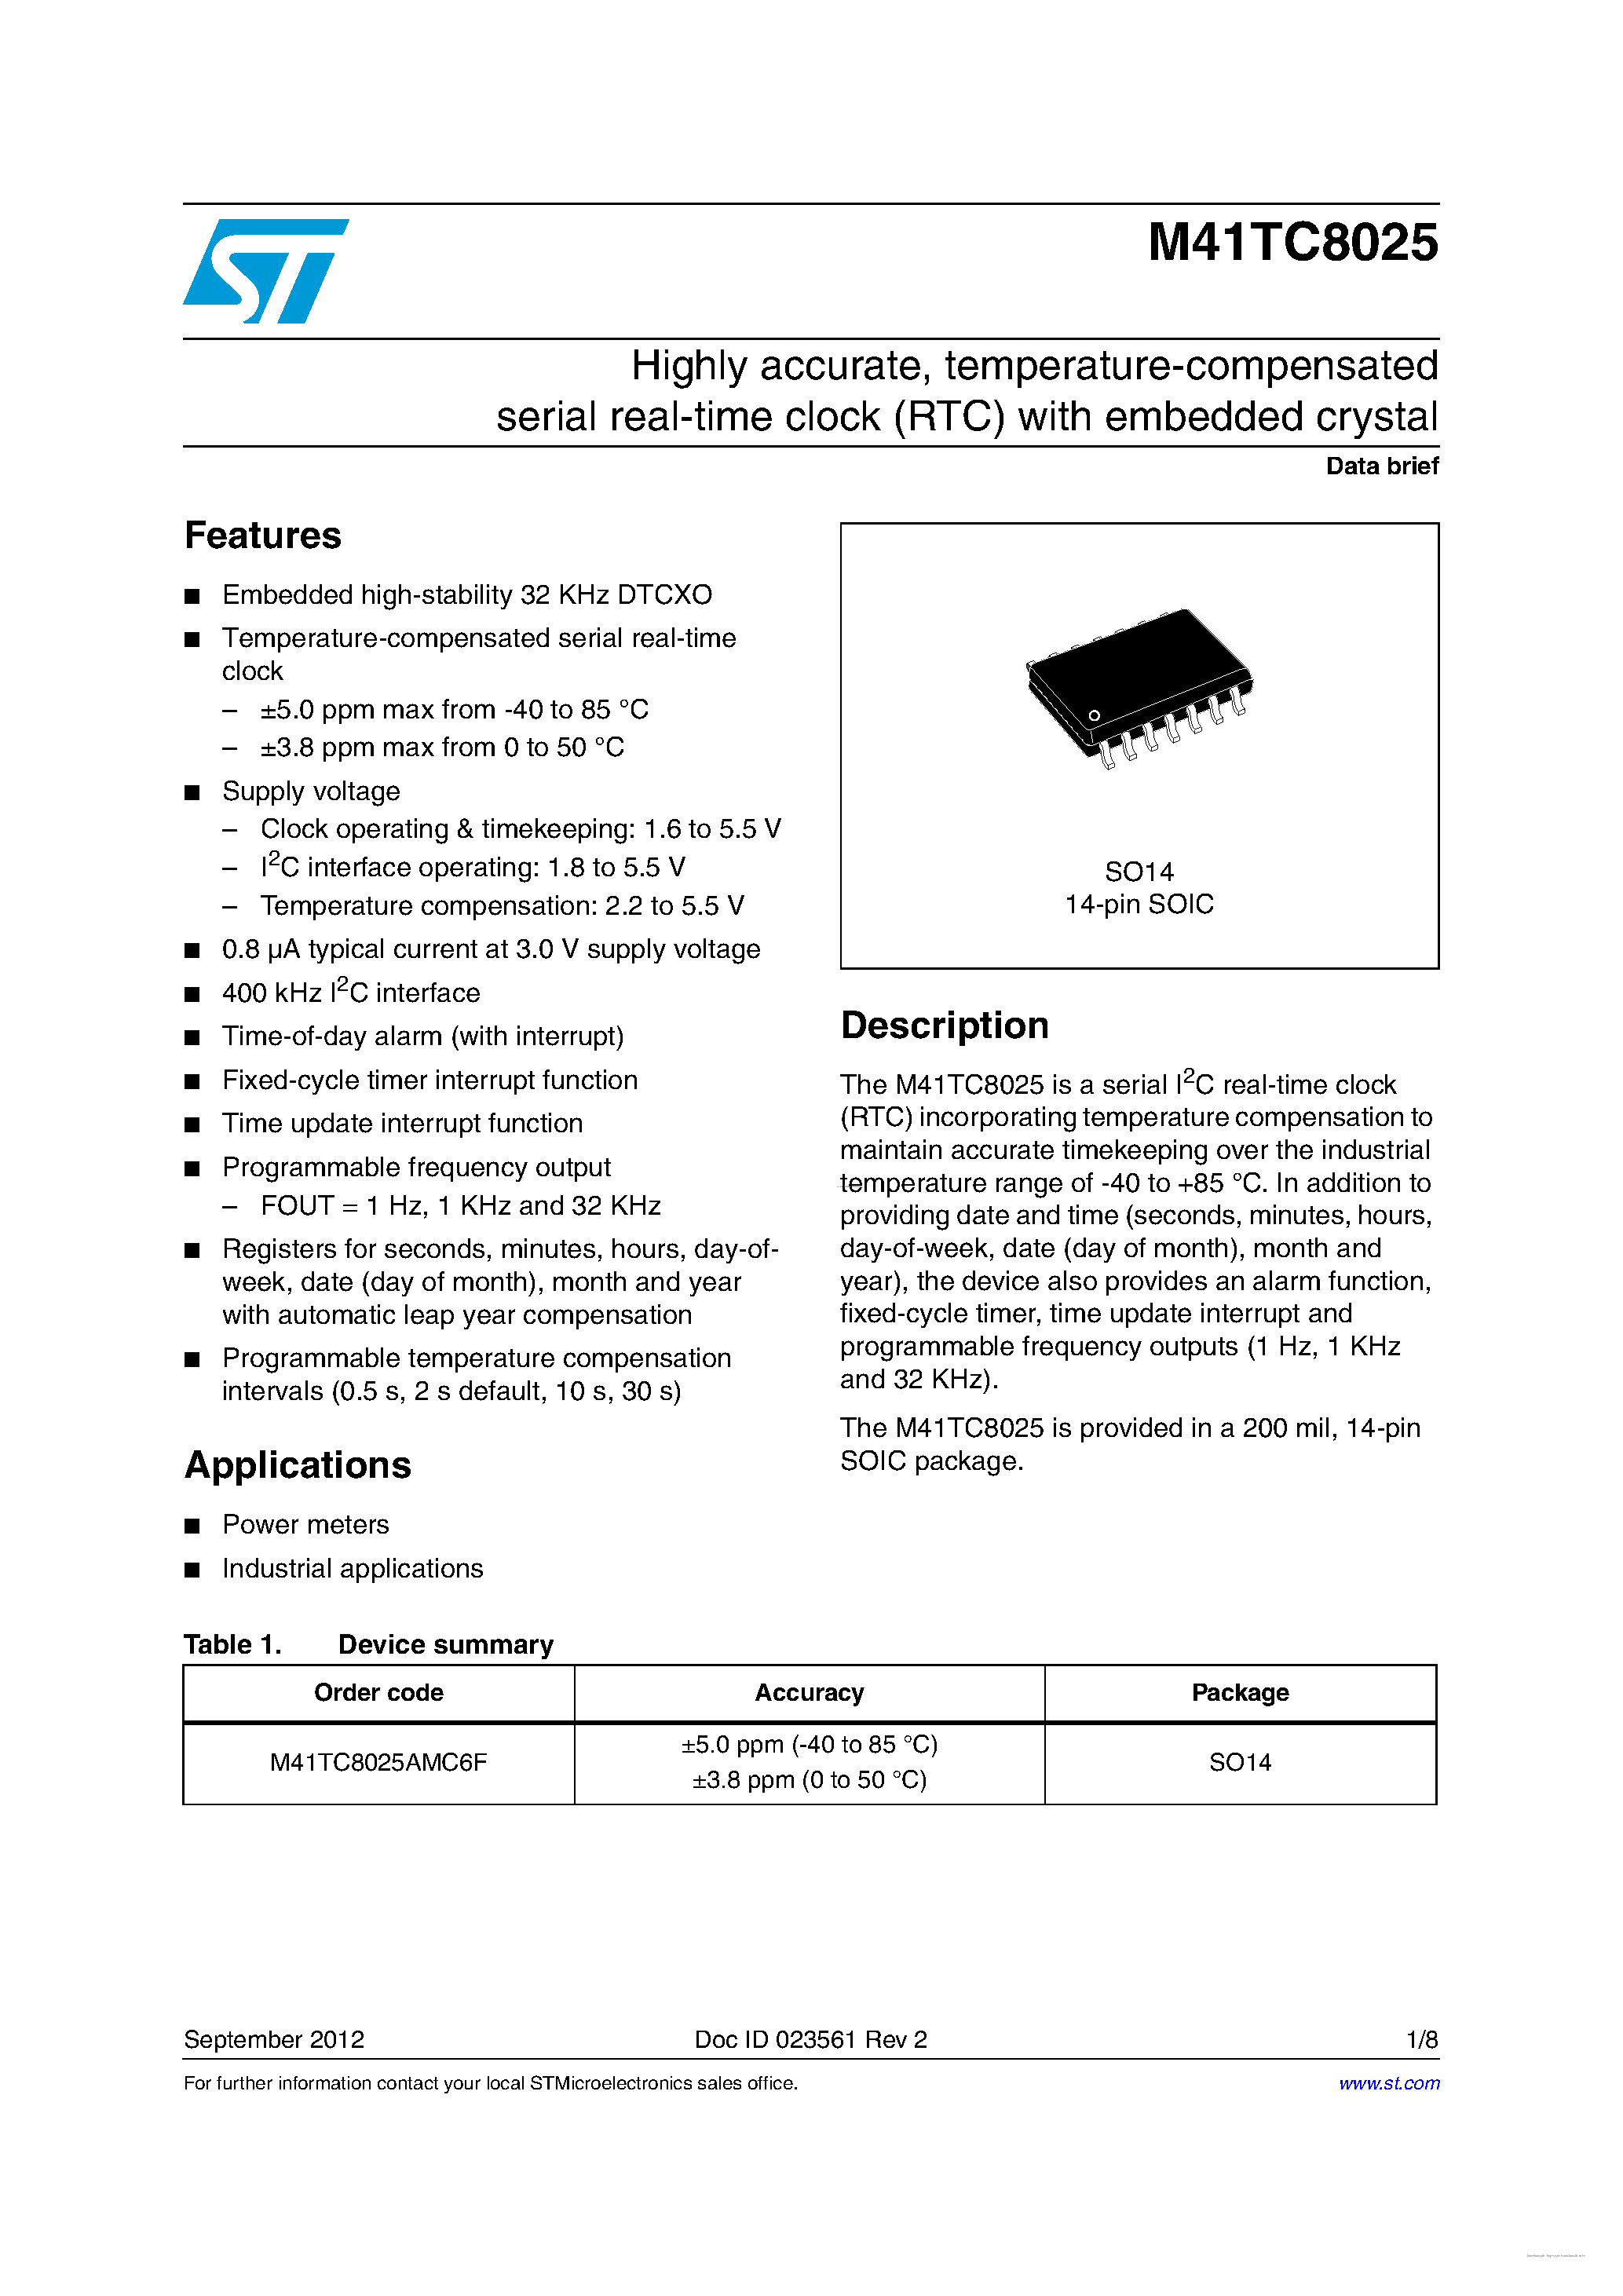 Datasheet M41TC8025 - temperature-compensated serial real-time clock page 1